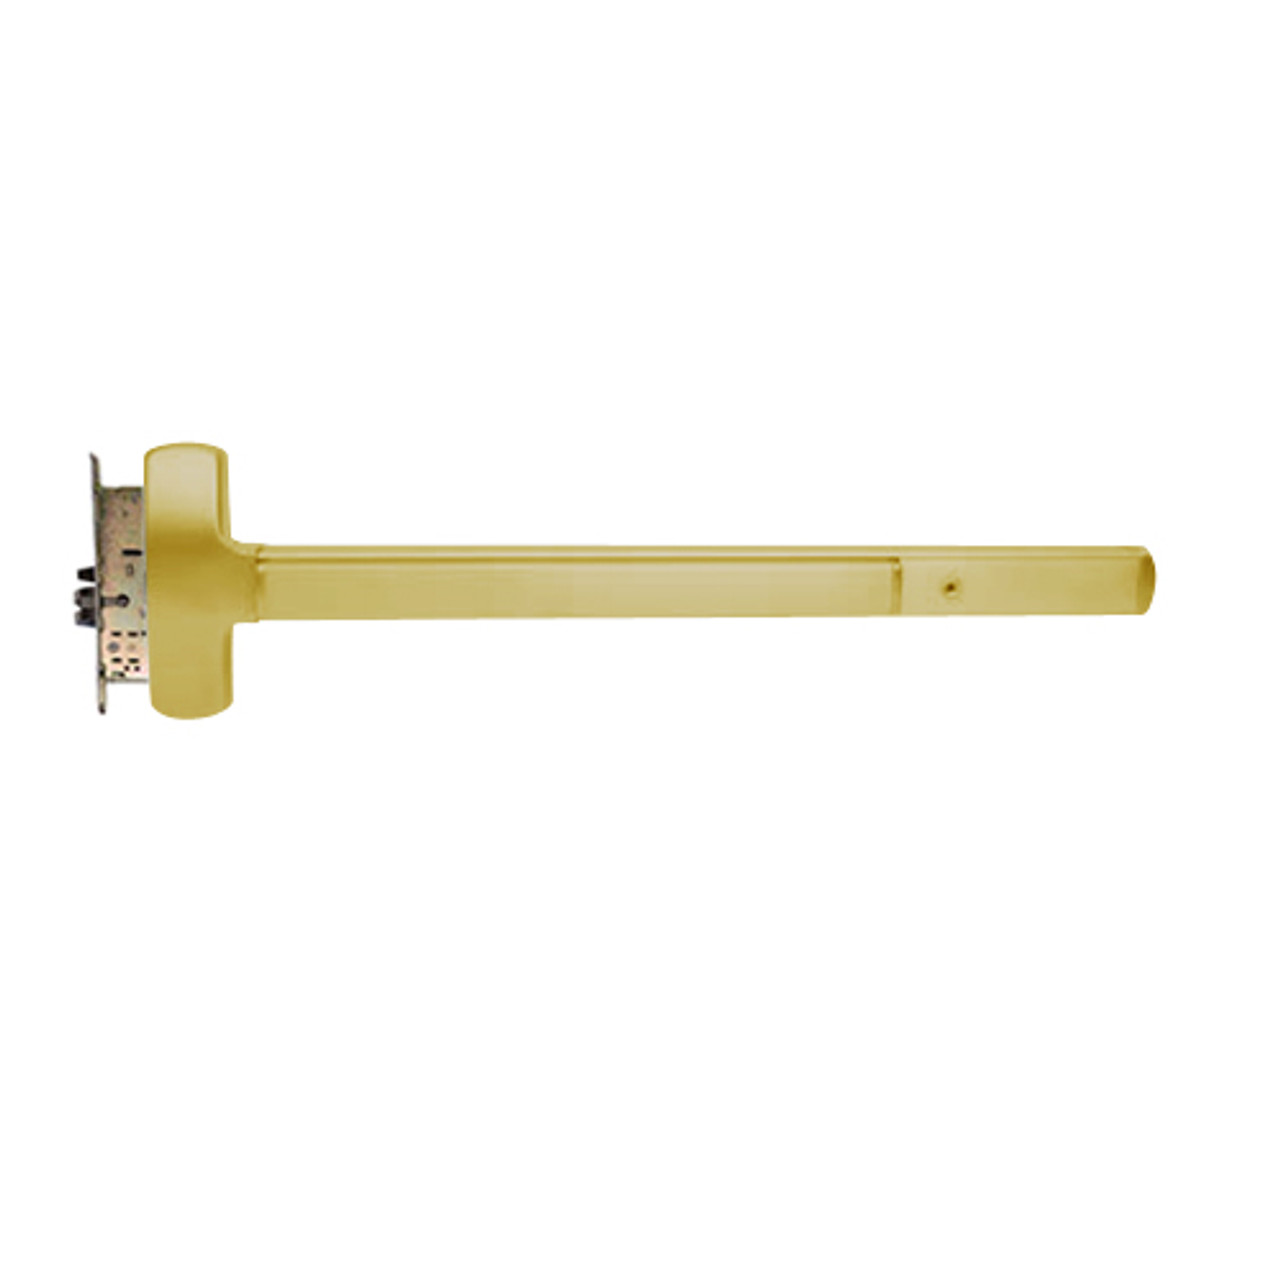 25-M-EO-US3-4-LHR Falcon Exit Device in Polished Brass